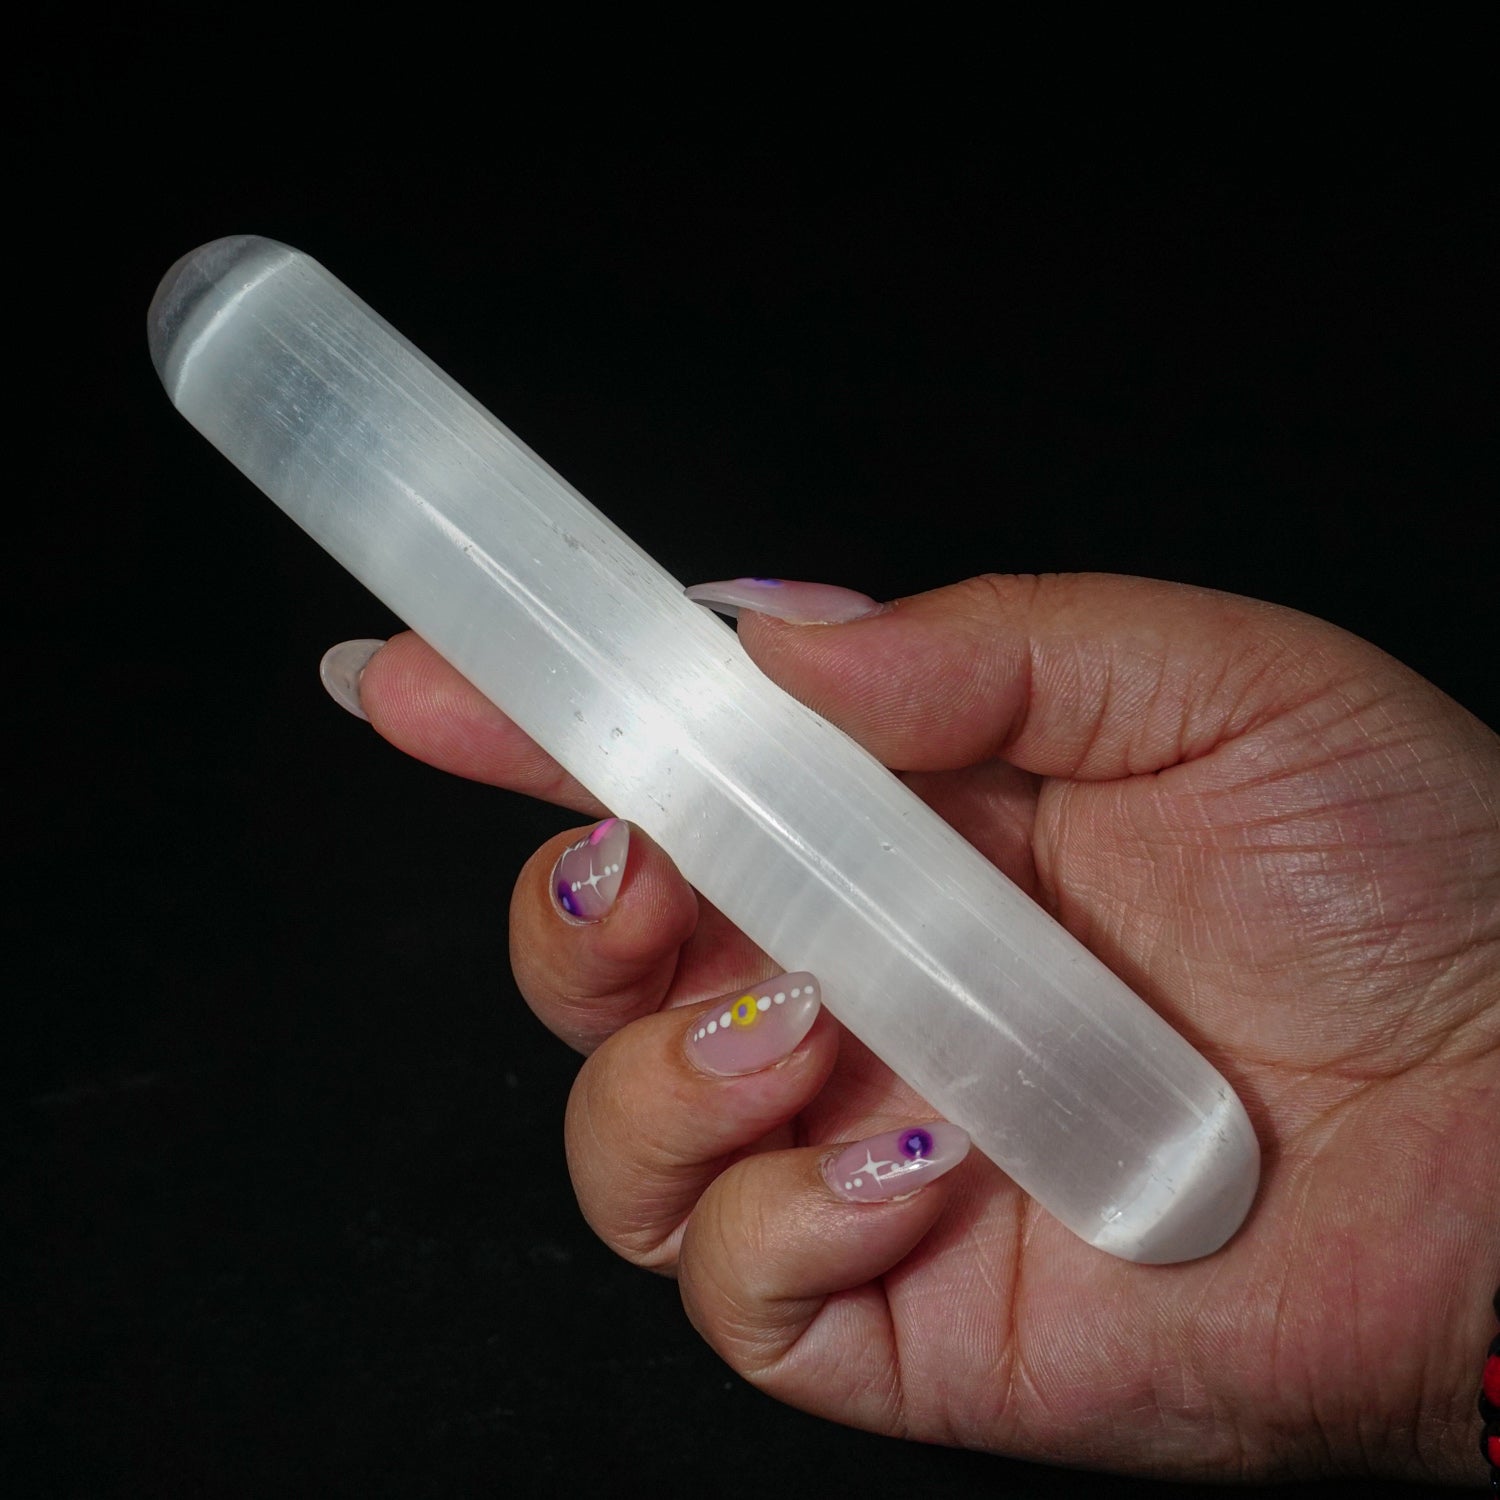 Genuine Cats-Eye Selenite Massage Wand from Morocco (142 grams)